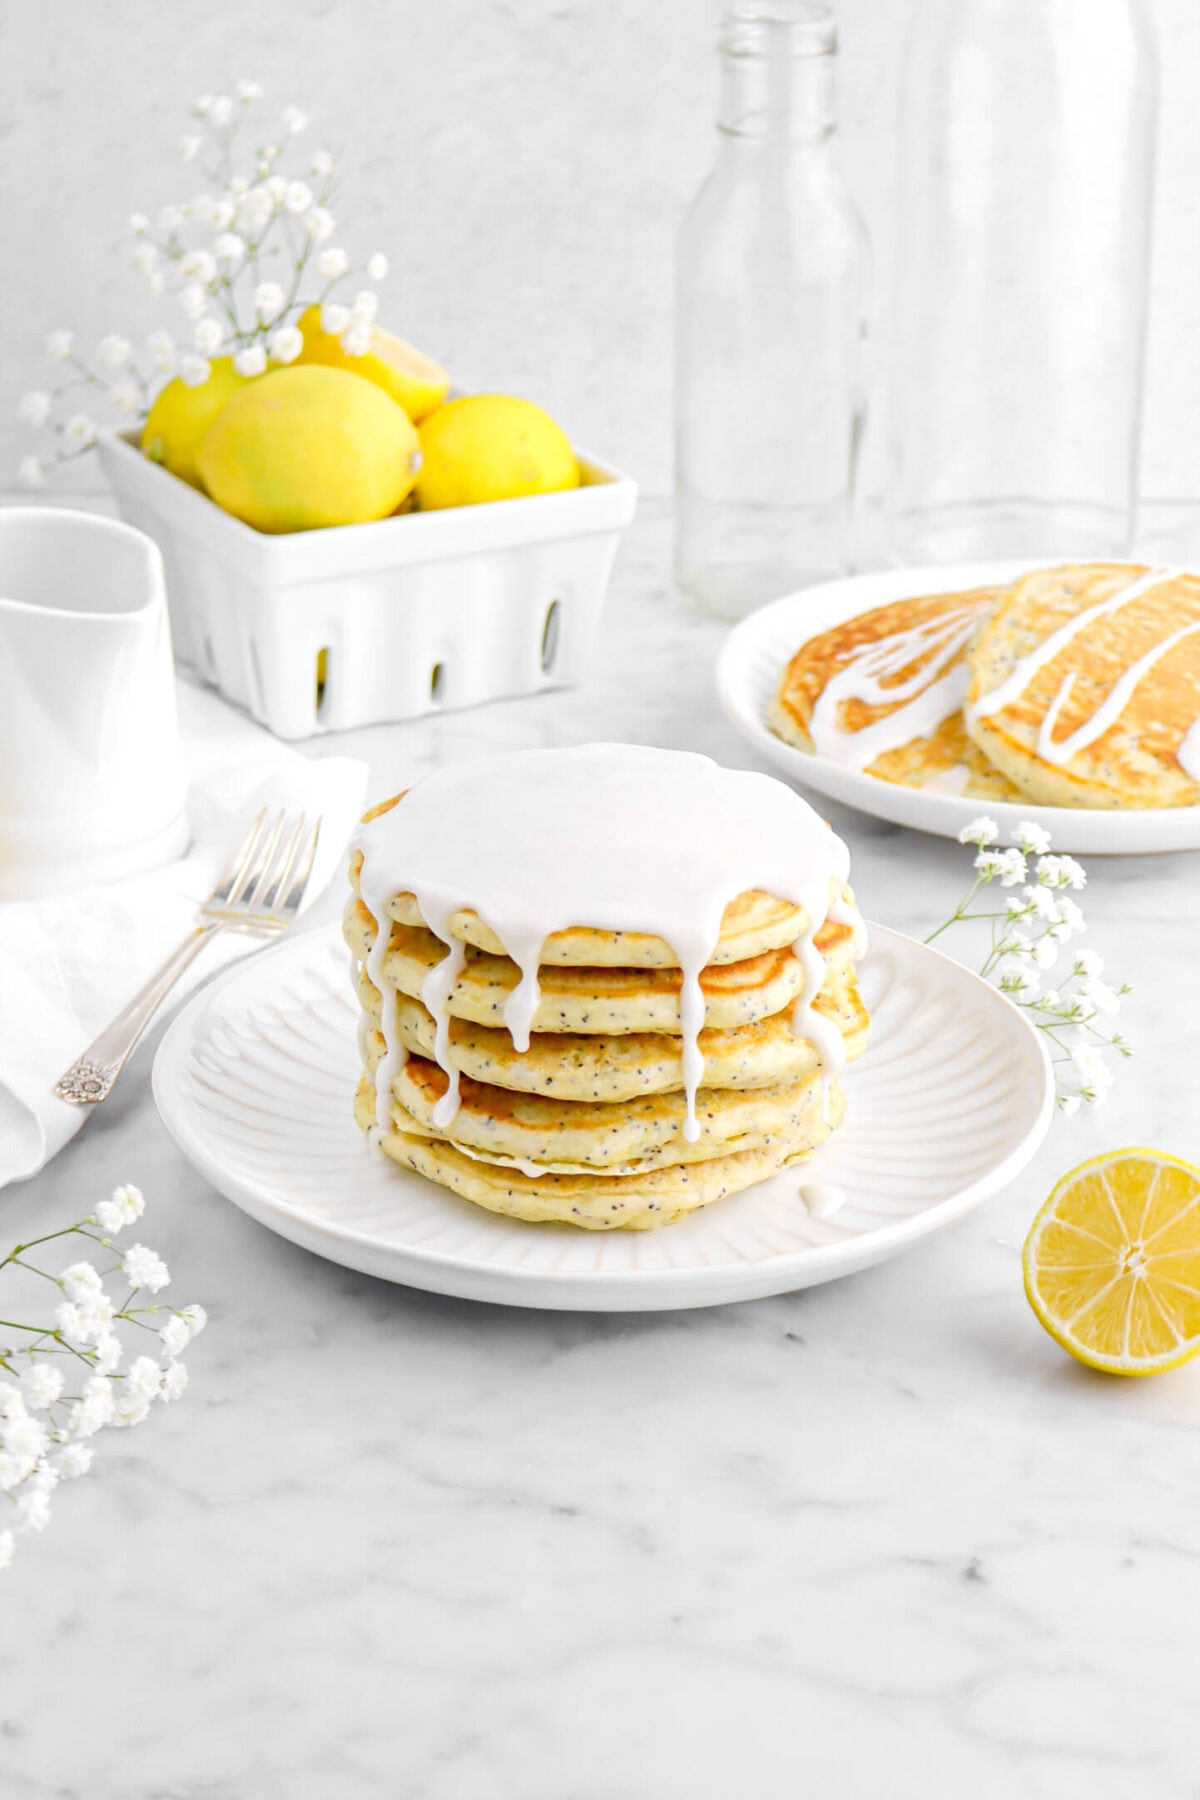 stack of lemon poppy seed pancakes on white plate with flowers around, a fork beside, a plate of pancakes behind, and berry basket full of lemons on marble surface.